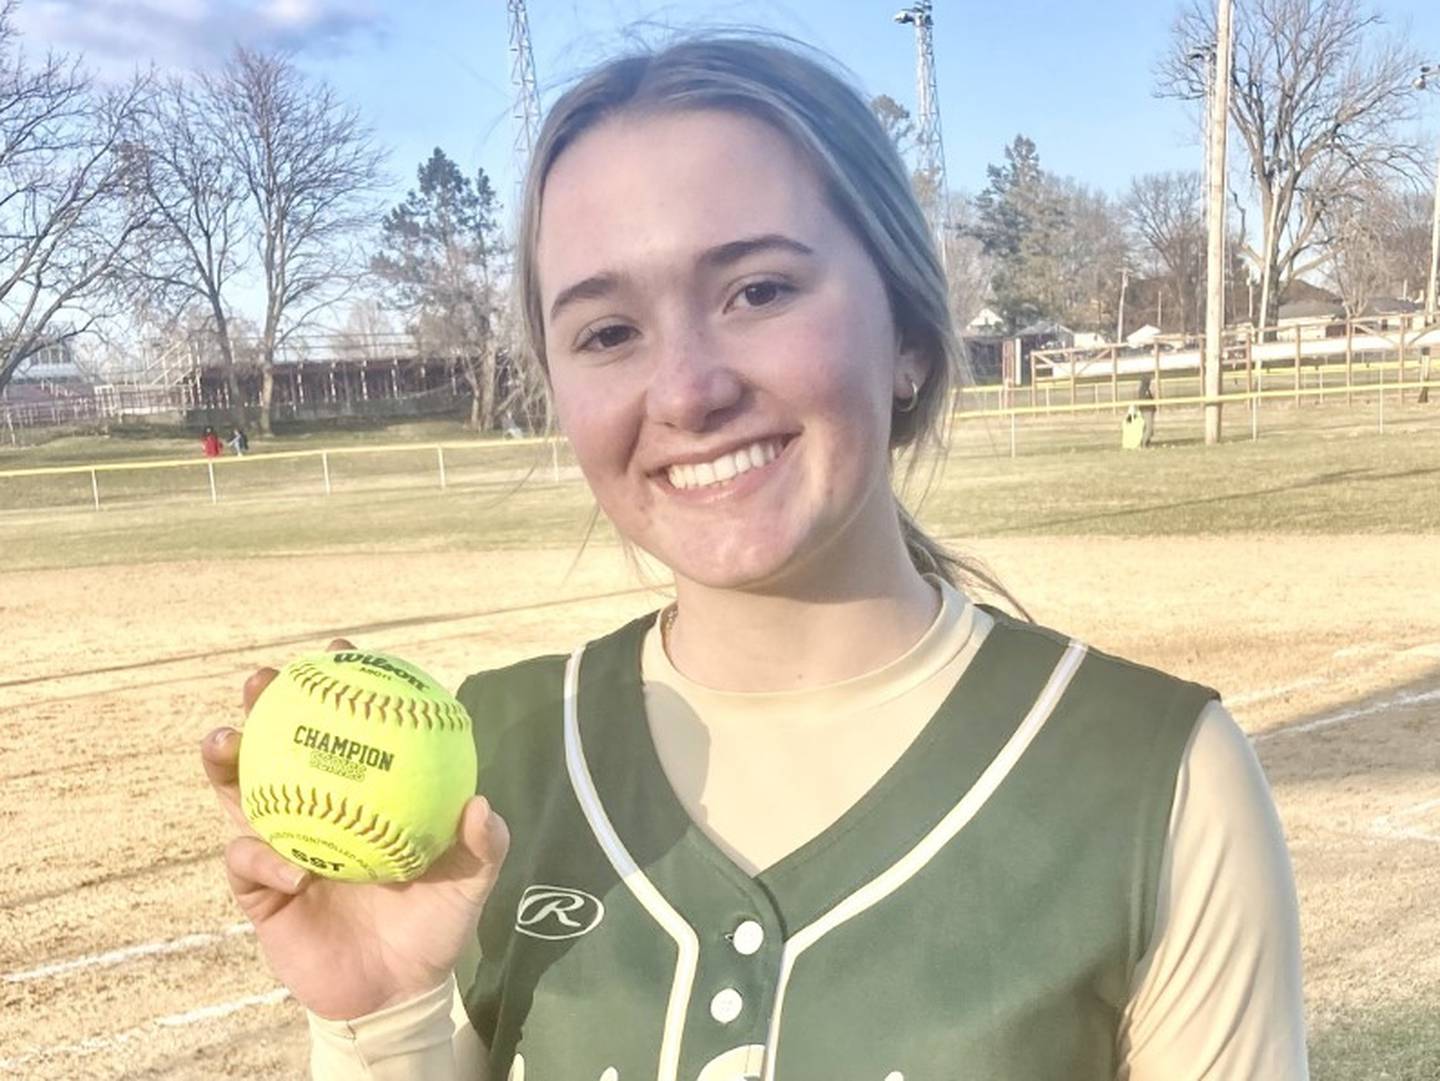 St. Bede's Ella Hermes pitched a five-inning no-hitter in a 15-0 win over Hall Monday. She struck out 15.